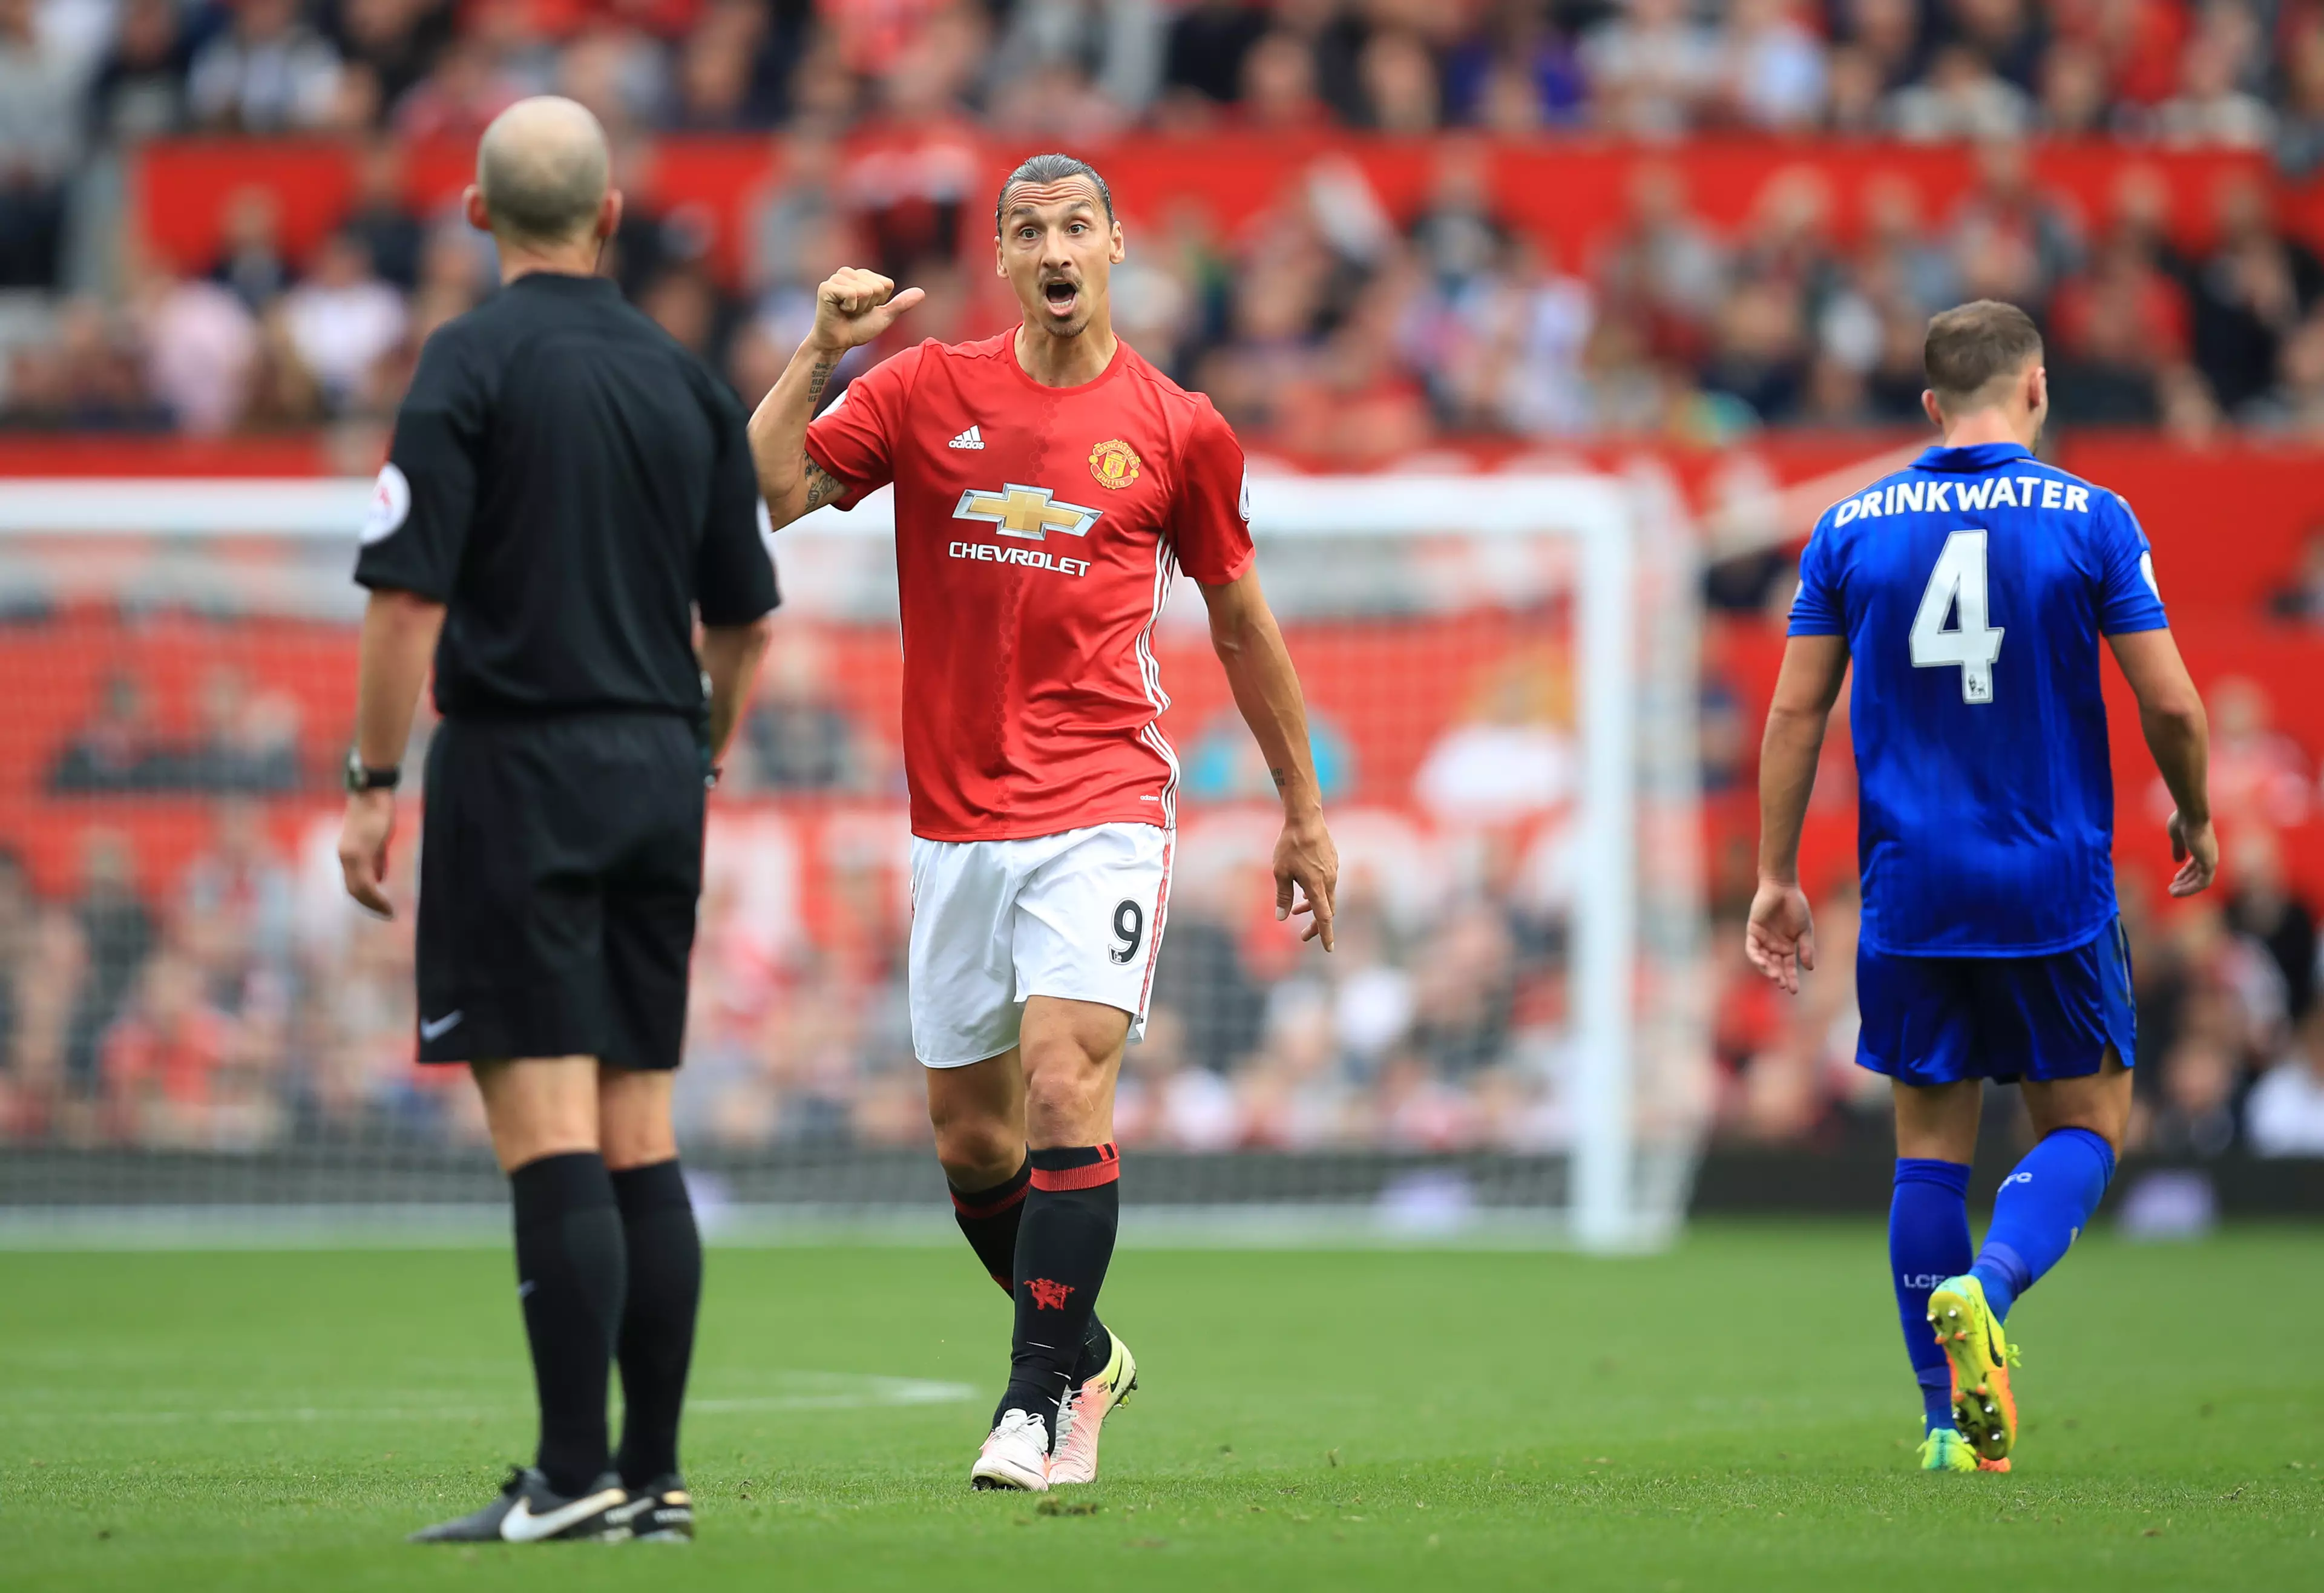 Zlatan Ibrahimovic Had To Deal With A 'Lookalike' Pitch Invader